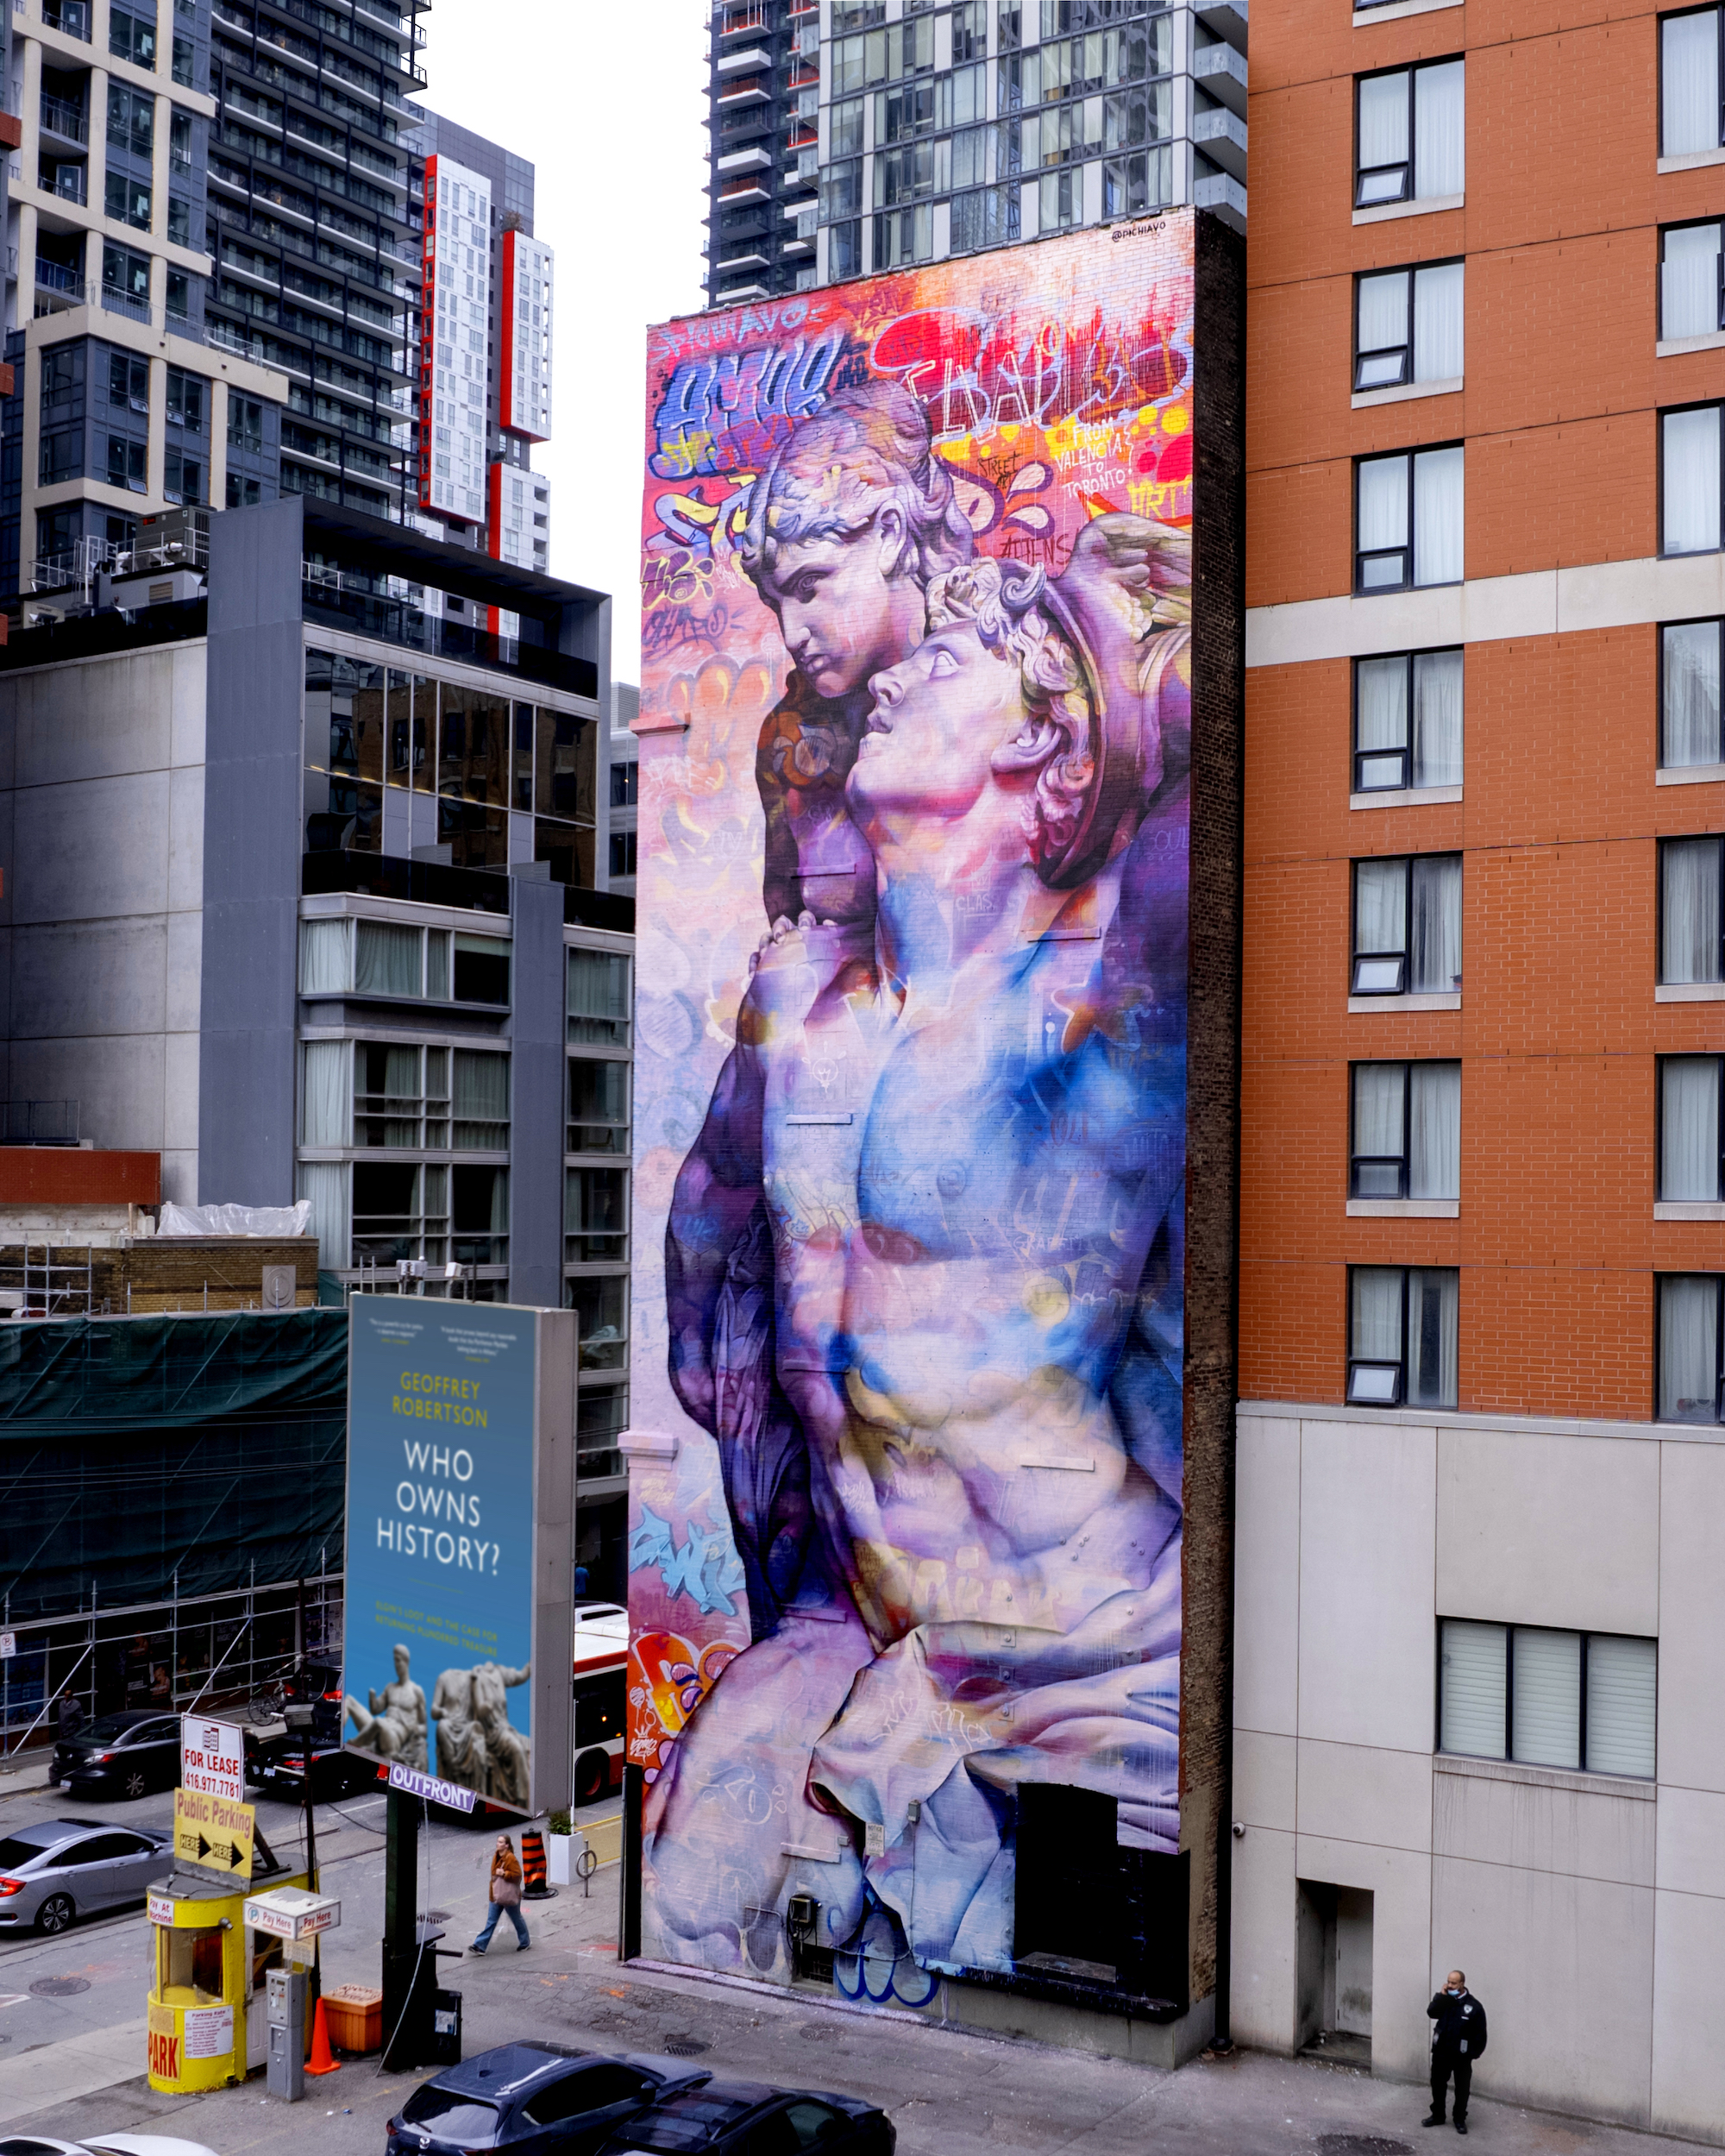 A mural of Mercury and Psyche with graffiti around them on the side of a building.